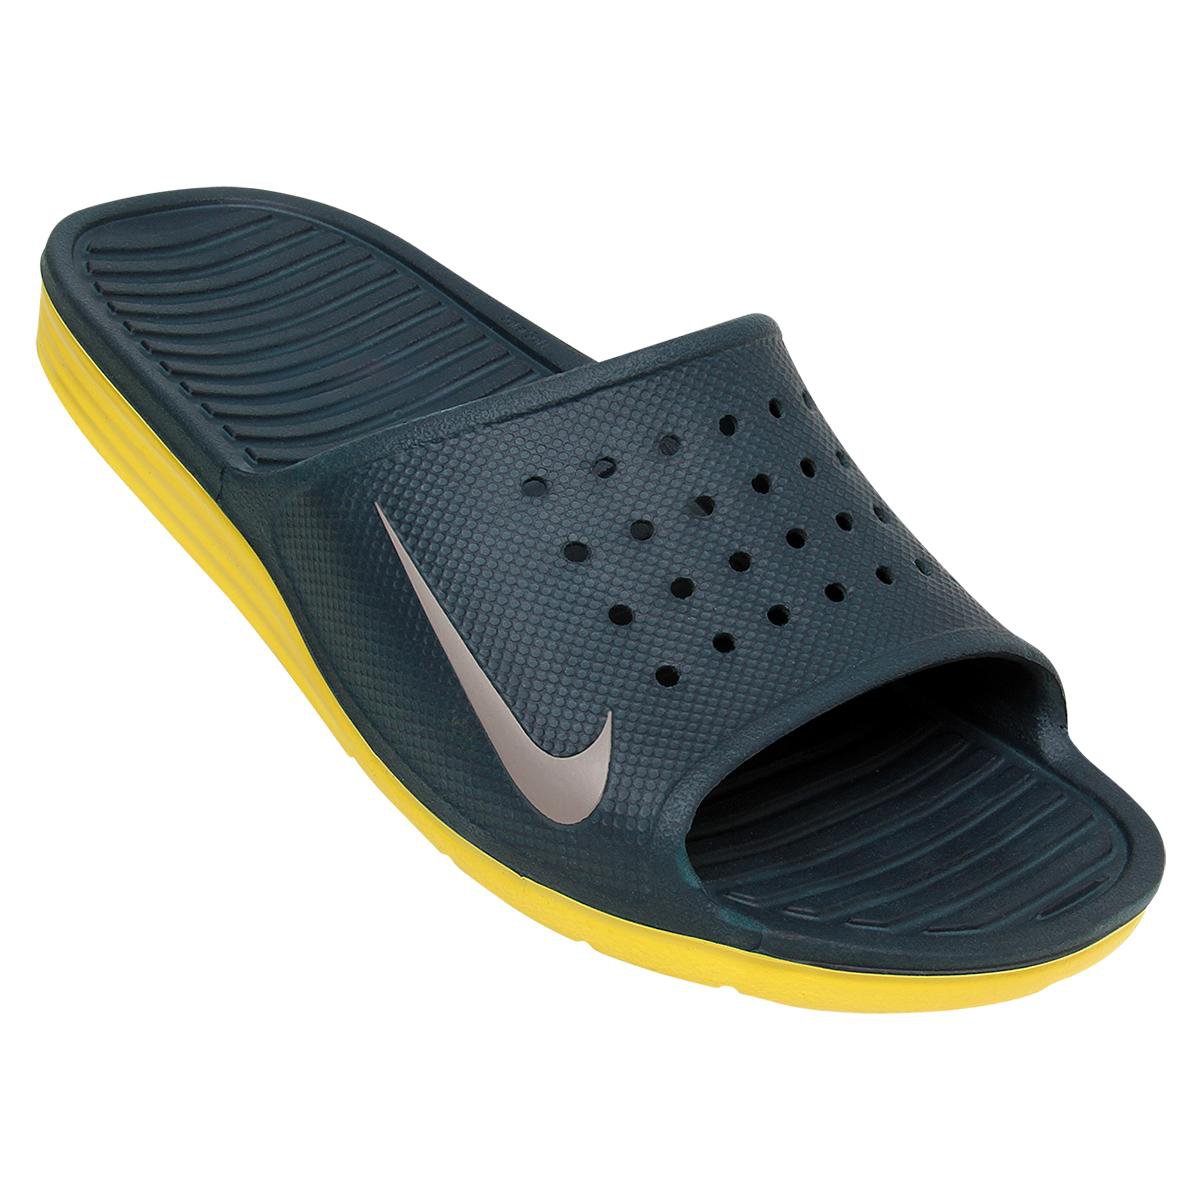 Buy Nike Multicolor Rubber Slippers For Men Online @ ₹649 from ShopClues